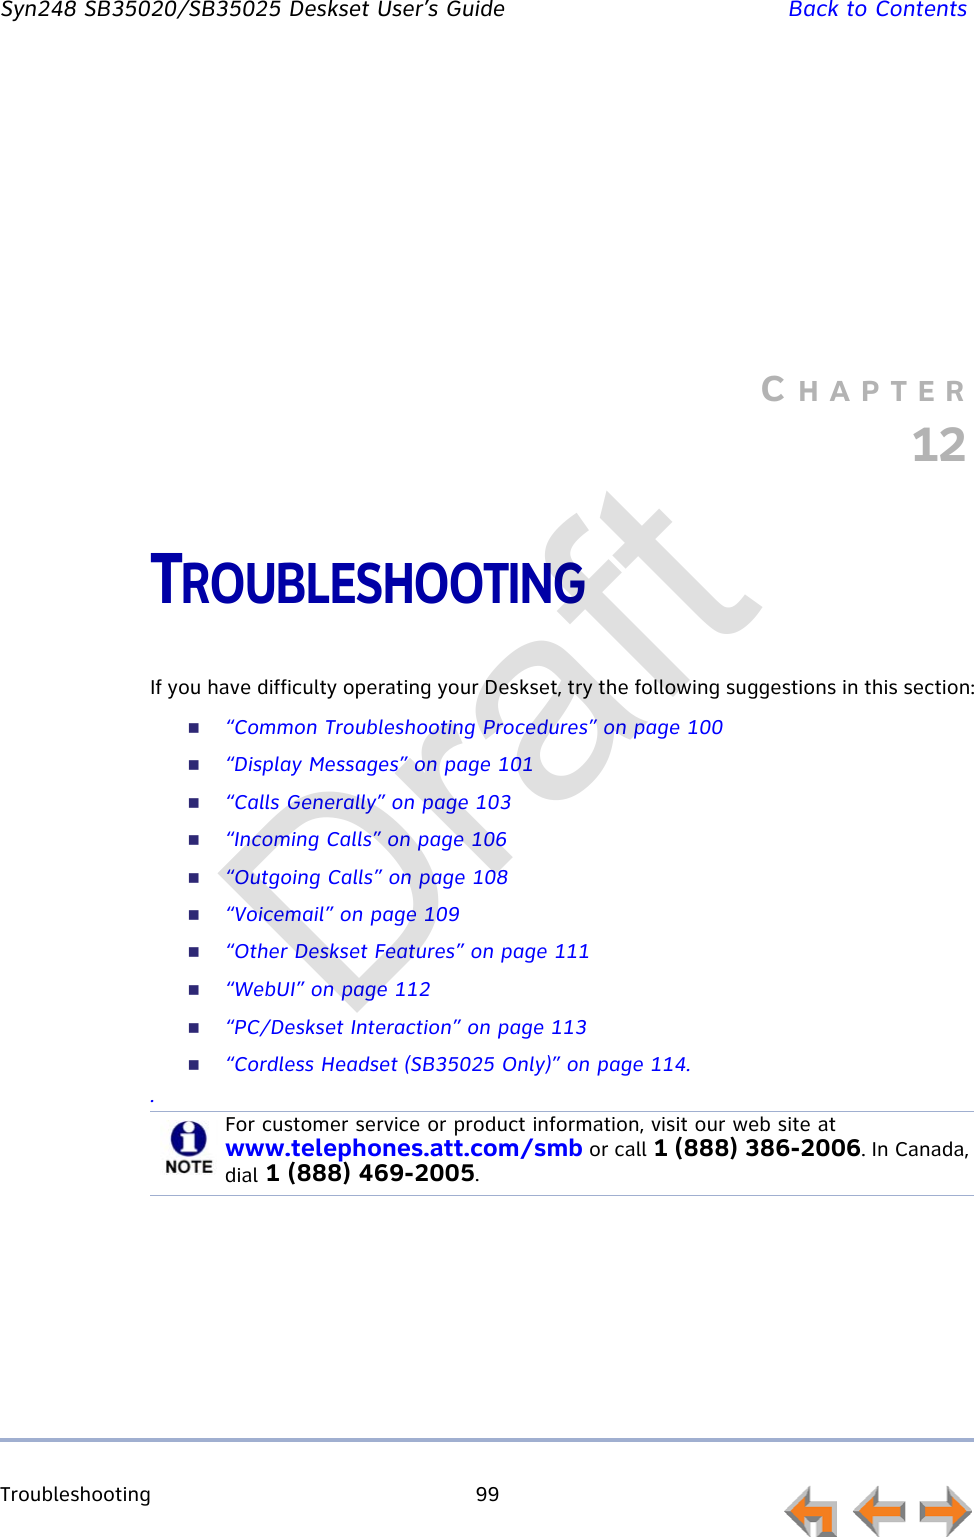 Troubleshooting 99         Syn248 SB35020/SB35025 Deskset User’s Guide Back to ContentsCHAPTER12TROUBLESHOOTINGIf you have difficulty operating your Deskset, try the following suggestions in this section:“Common Troubleshooting Procedures” on page 100“Display Messages” on page 101“Calls Generally” on page 103“Incoming Calls” on page 106“Outgoing Calls” on page 108“Voicemail” on page 109“Other Deskset Features” on page 111“WebUI” on page 112“PC/Deskset Interaction” on page 113“Cordless Headset (SB35025 Only)” on page 114..For customer service or product information, visit our web site at www.telephones.att.com/smb or call 1 (888) 386-2006. In Canada, dial 1 (888) 469-2005.Draft